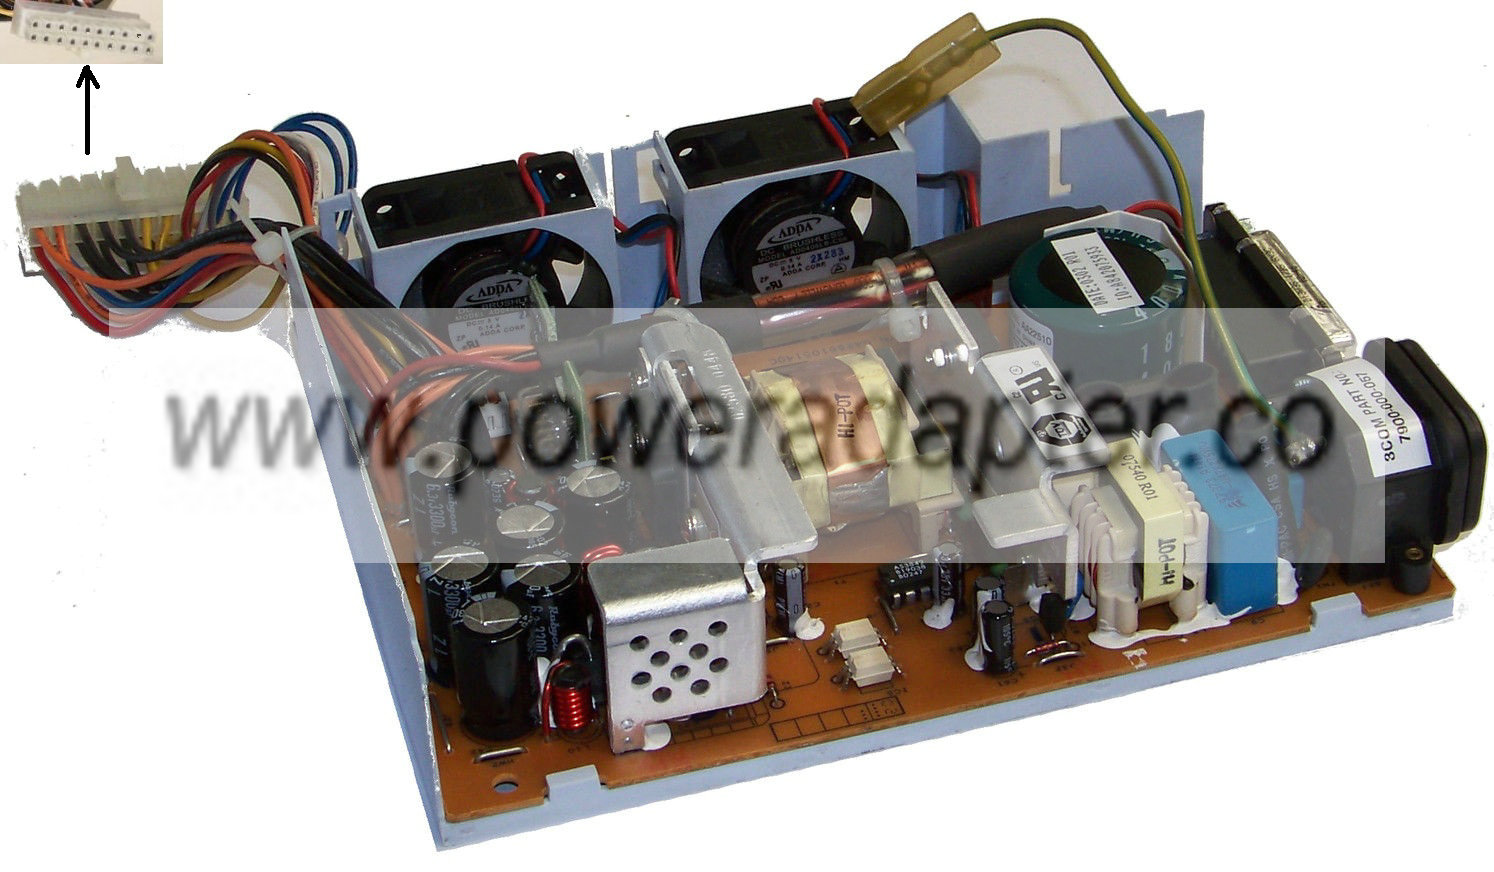 Astec AA22510 Open frame PSU 3.3V 10.5A Used Power Supply for 3c